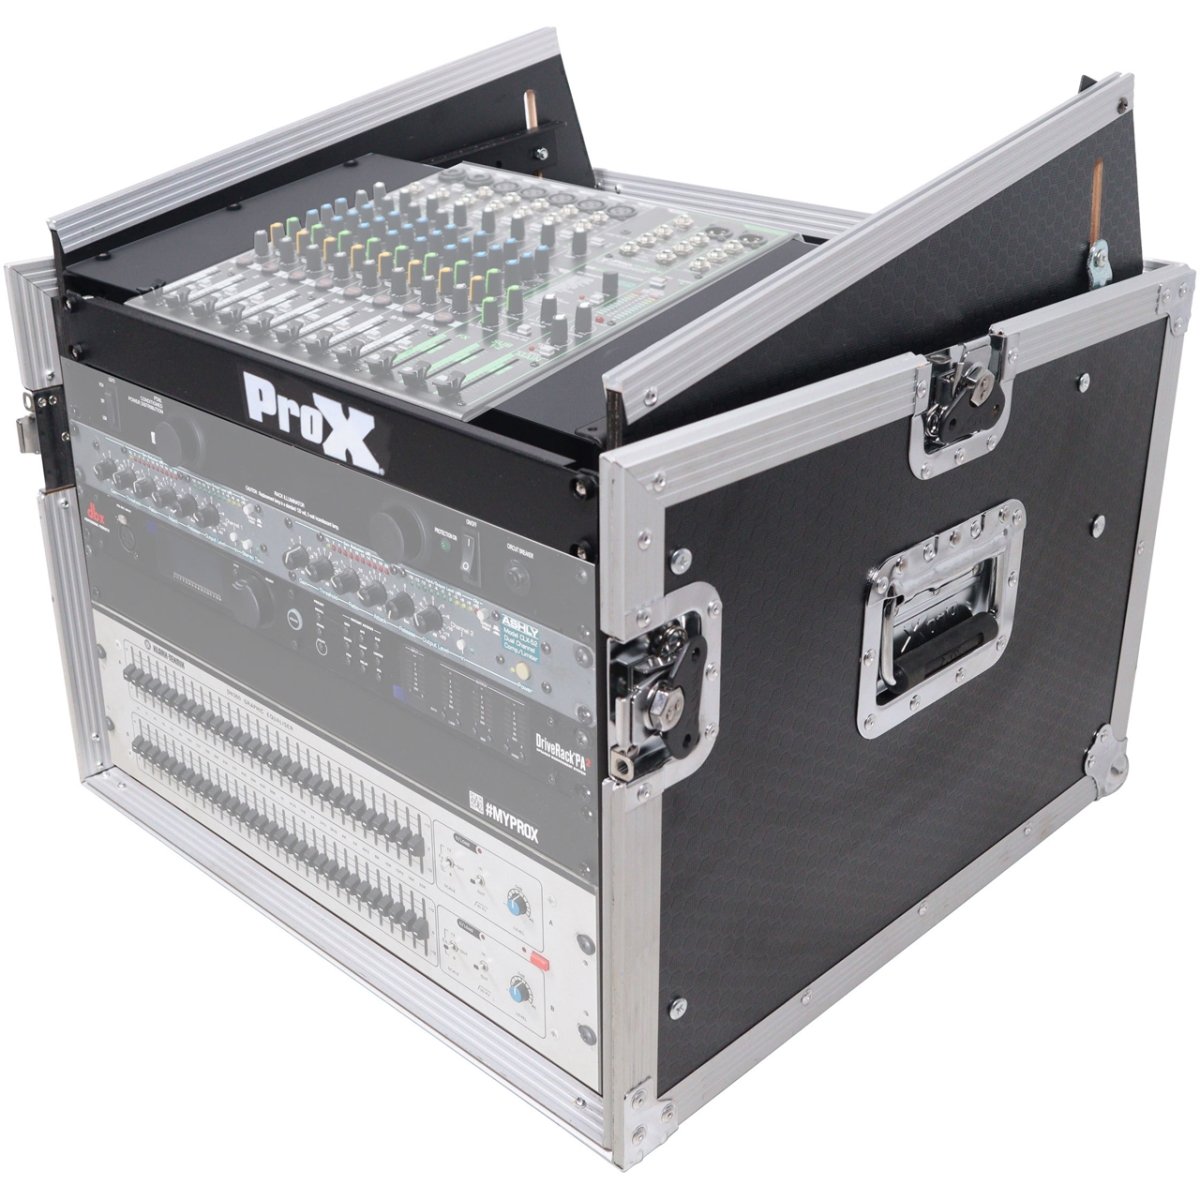 Picture of ProX Live Performance Gear PXG-T-8MRSS T-8MRSS 8RU Vertical Rack Mount Flight Case with 10RU Top for Mixer Combo Amp Rack with Caster Wheels